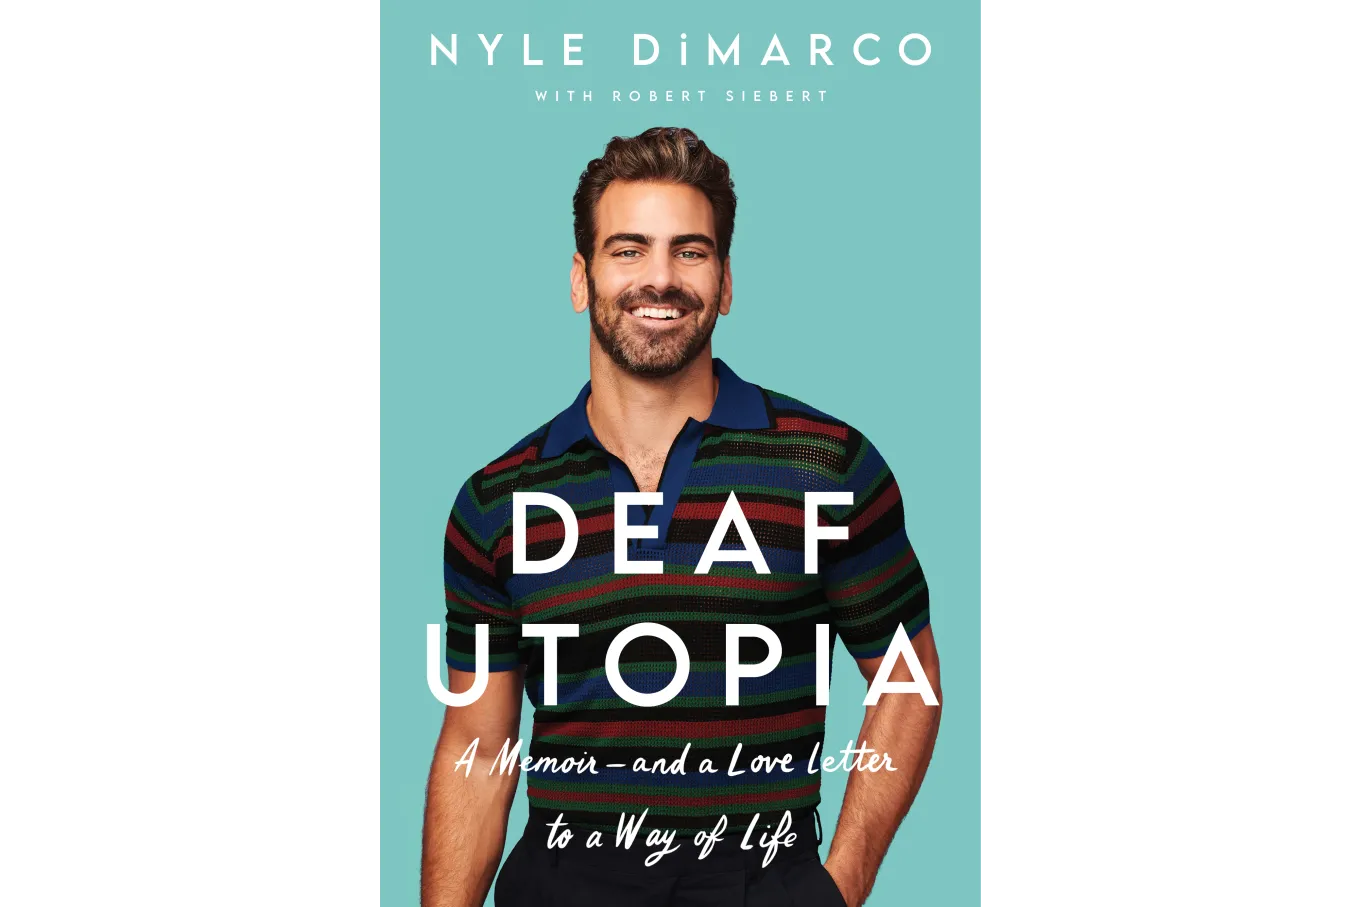 Nyle DiMarco on the cover